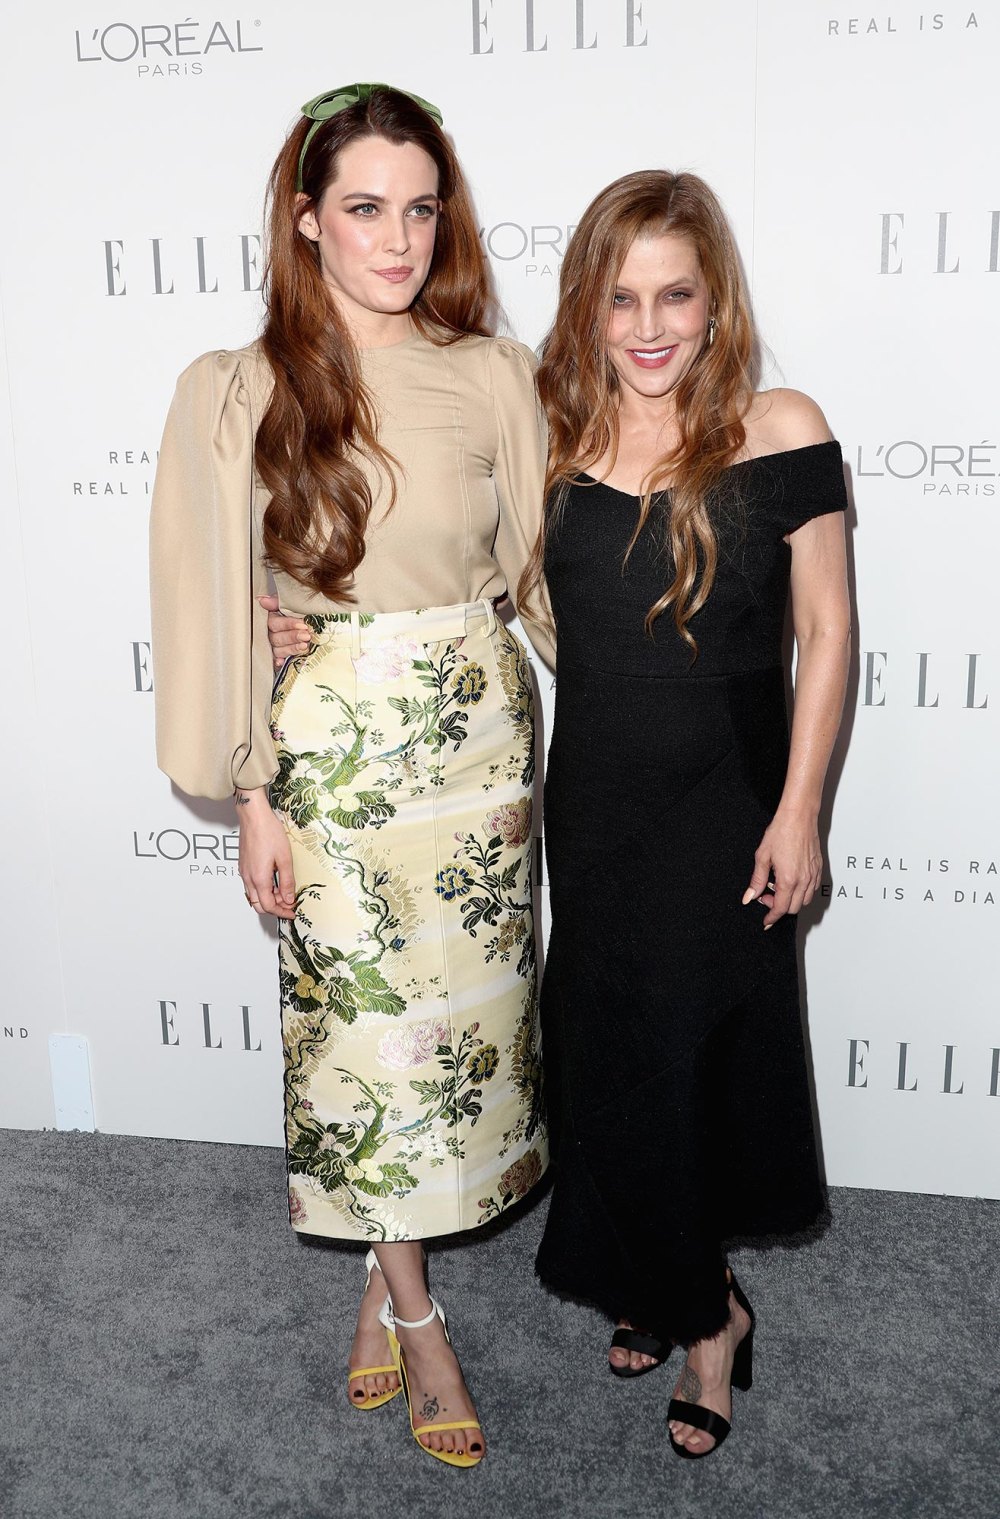 Riley Keough Is Honored to Release Late Mom Lisa Marie Presleys Memoir Later This Year